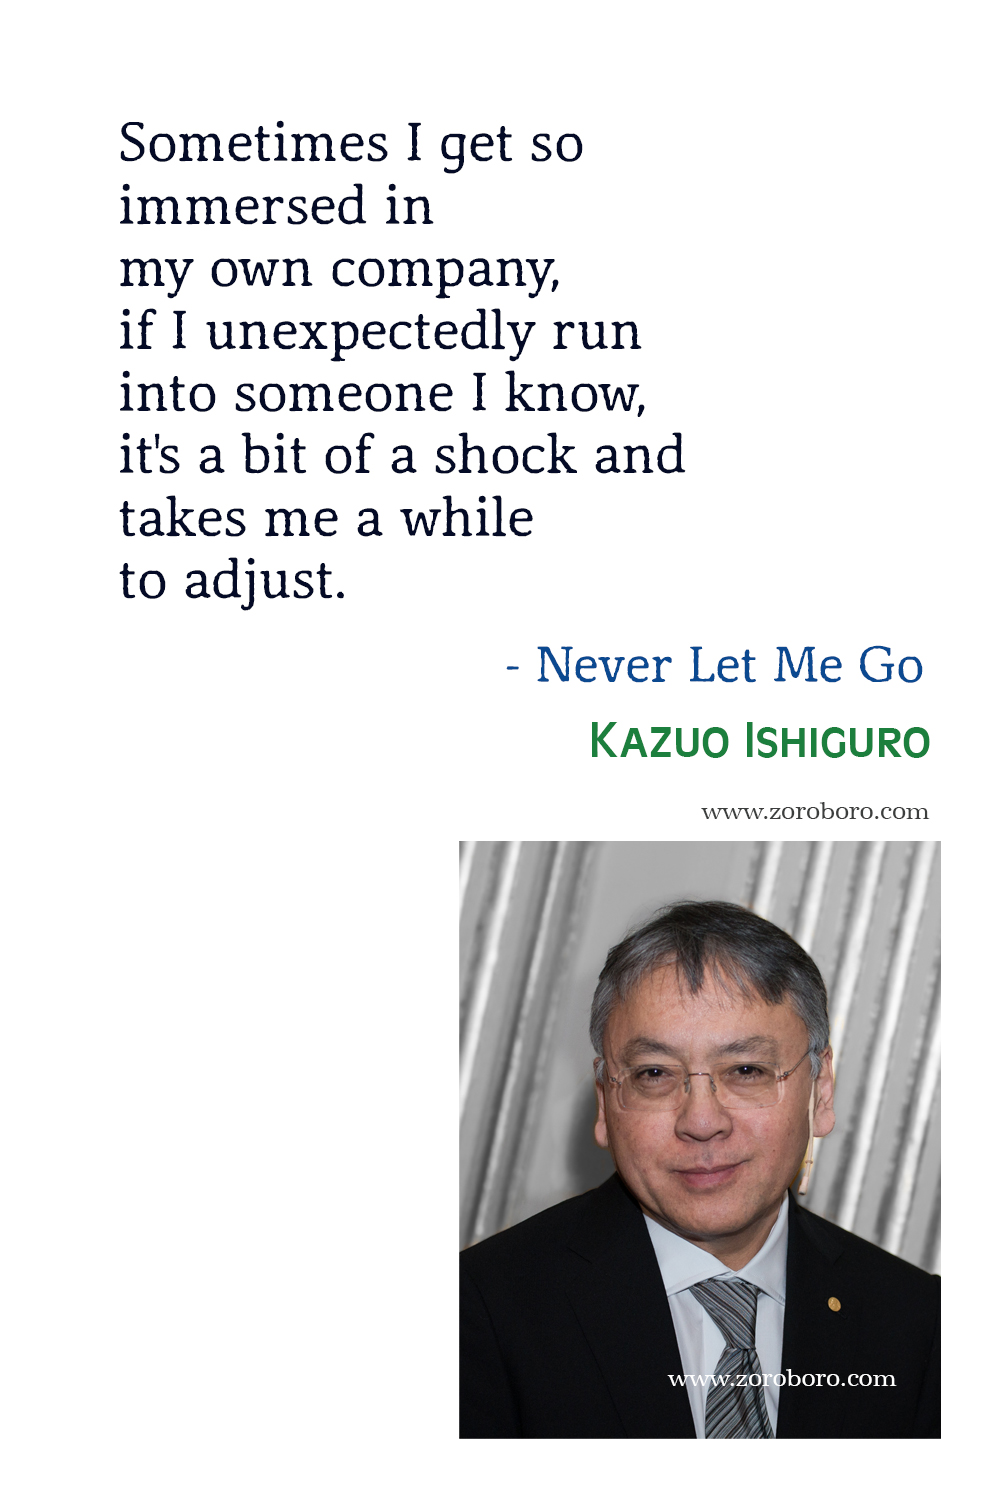 Kazuo Ishiguro Quotes, Kazuo Ishiguro Never Let Me Go Quotes, Kazuo Ishiguro Books Quotes, Kazuo Ishiguro The Remains of the Day Quotes.